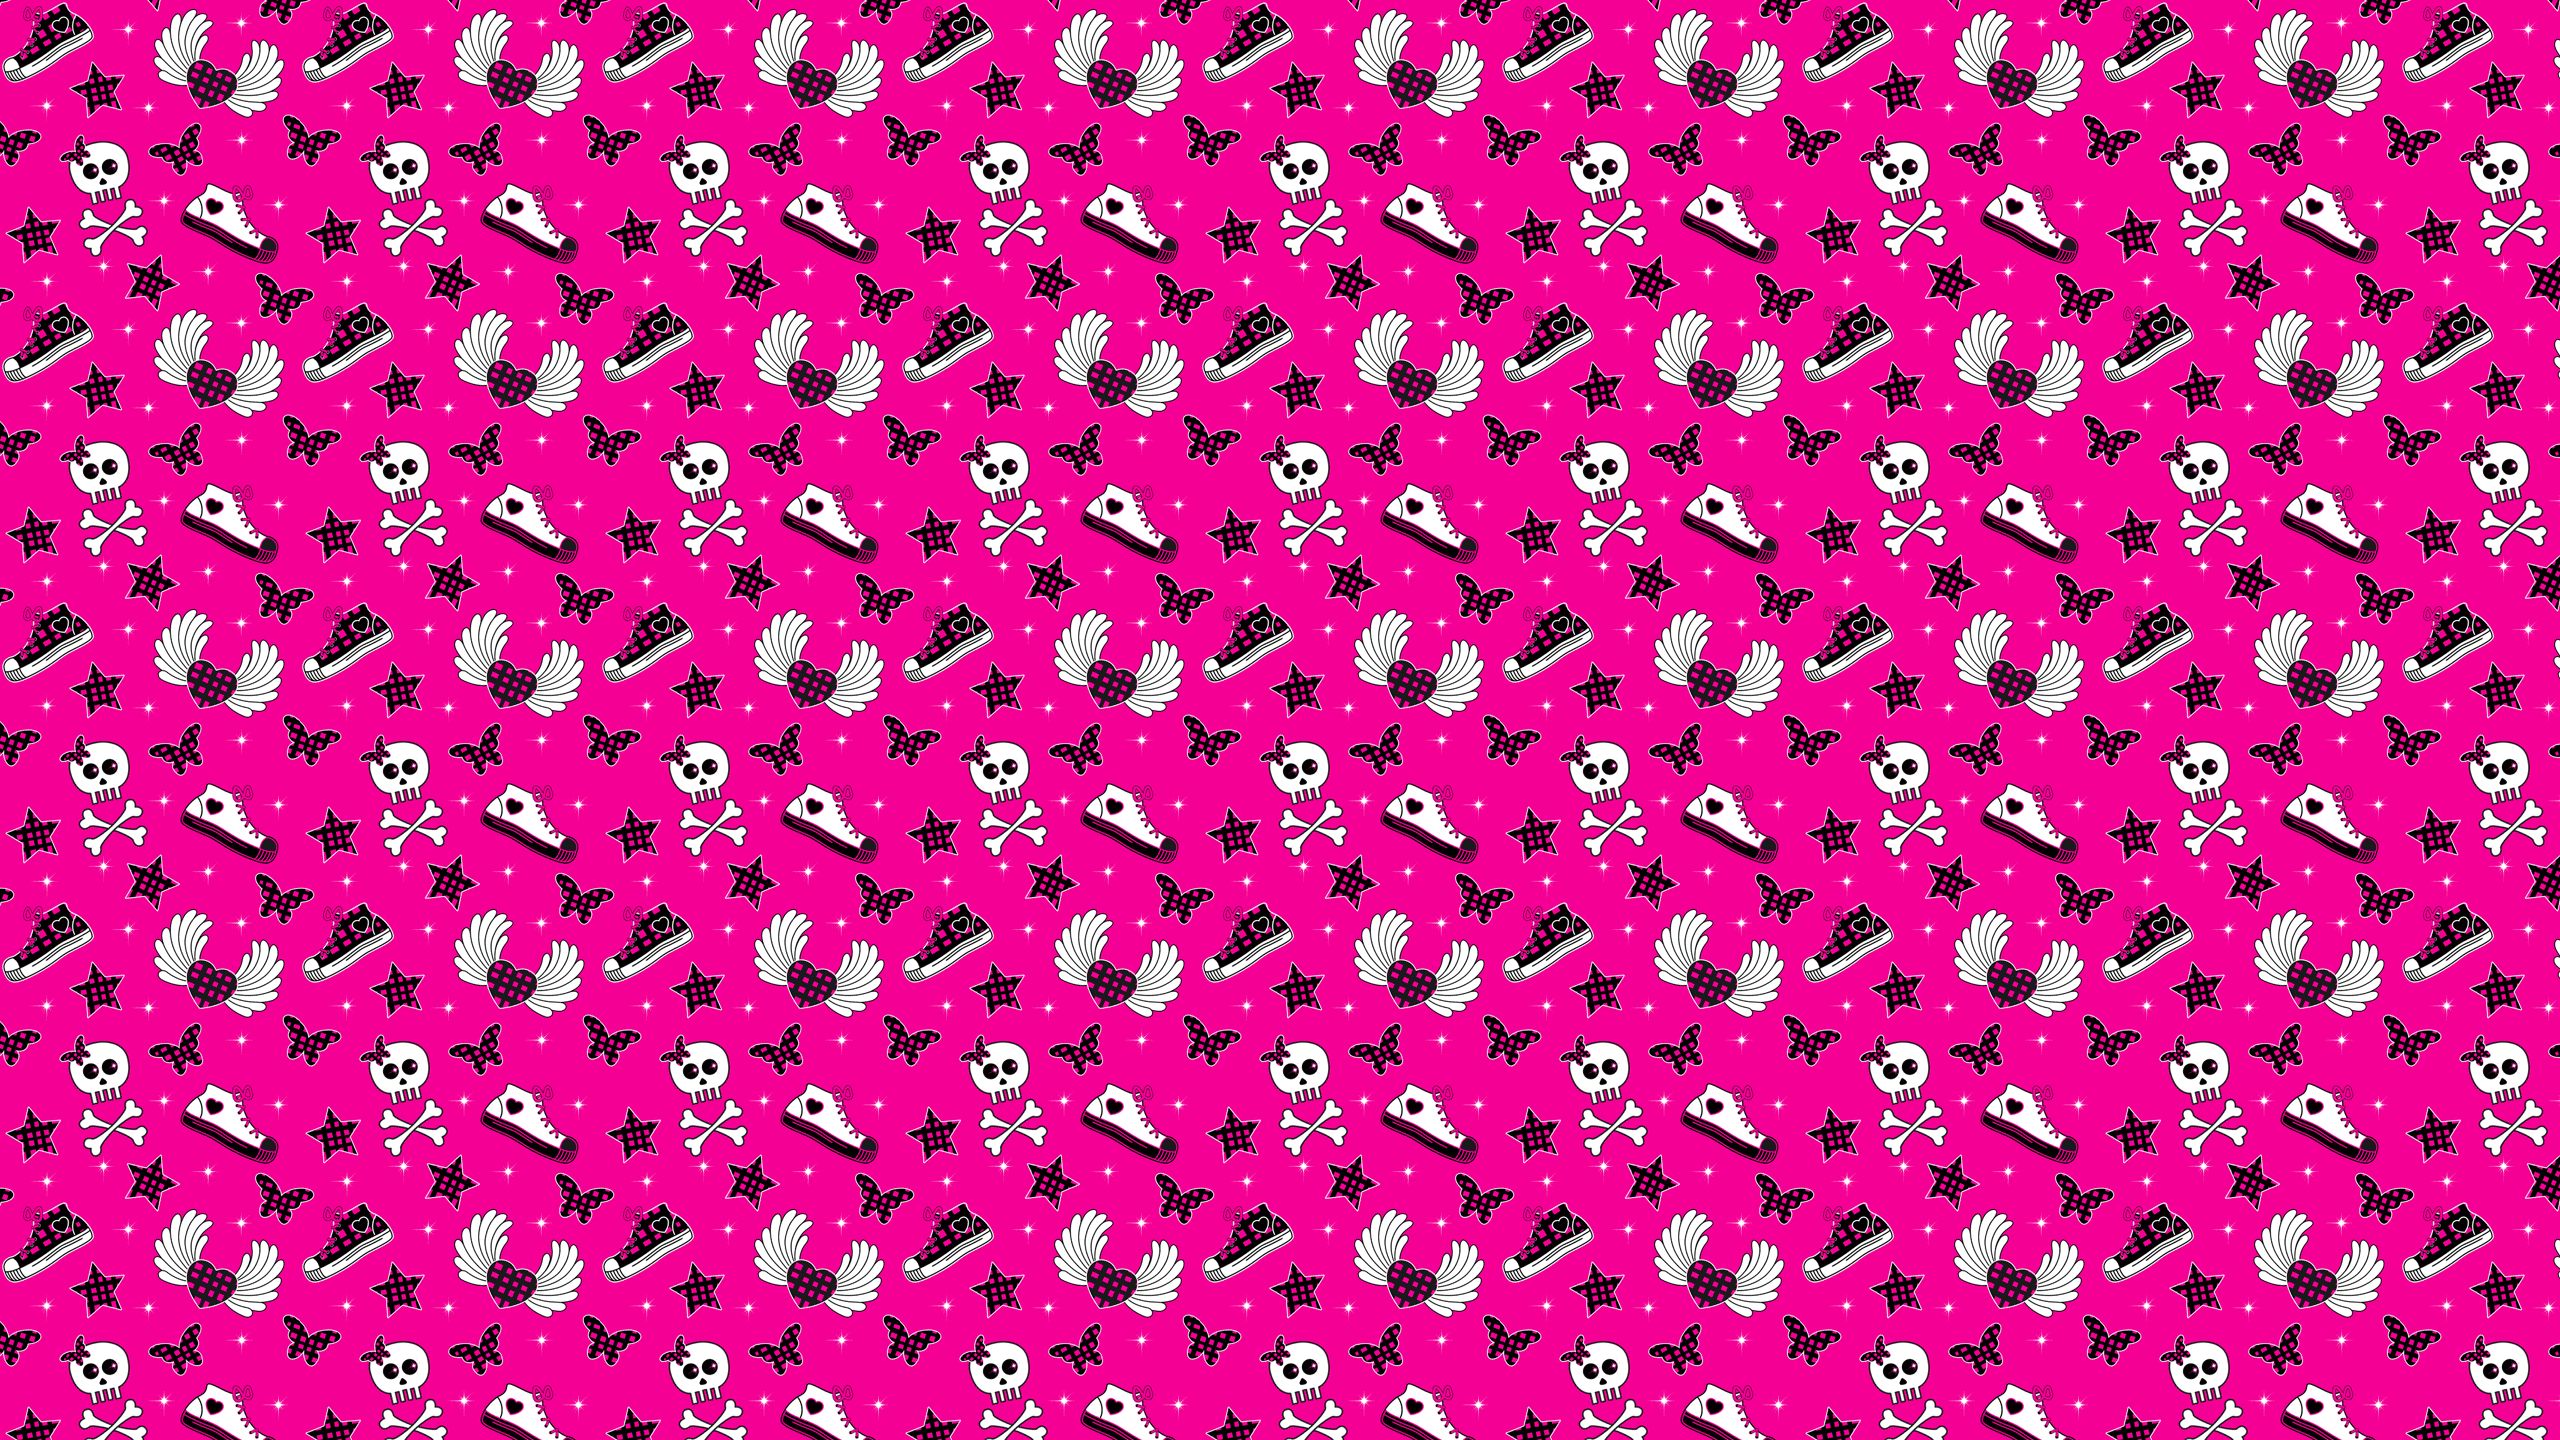 A pink pattern with white dots and lines - Punk